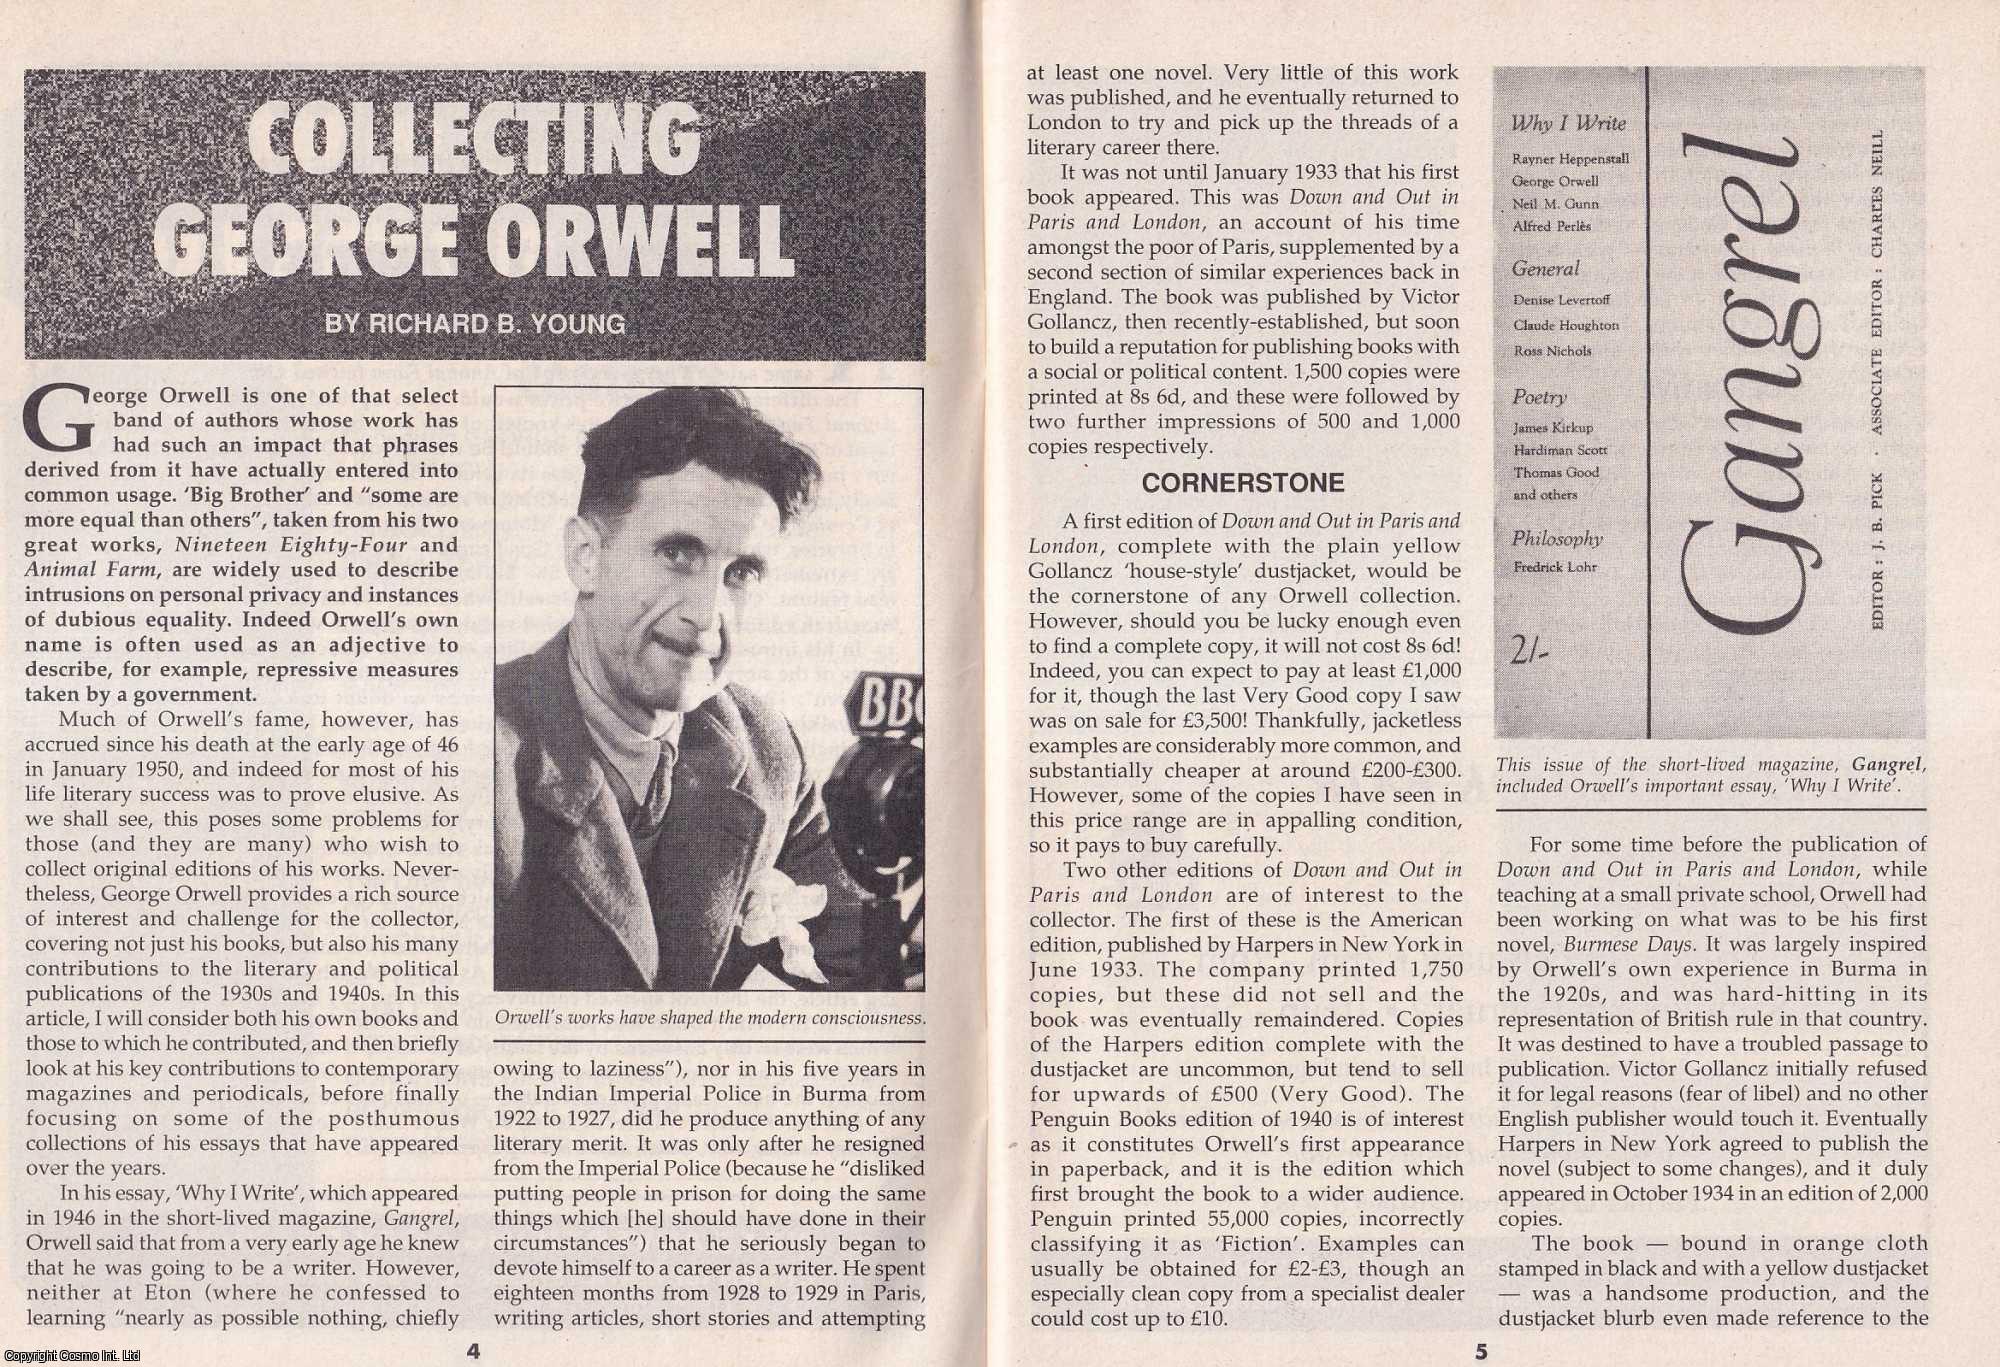 Richard B. Young - Collecting George Orwell. This is an original article separated from an issue of The Book & Magazine Collector publication.